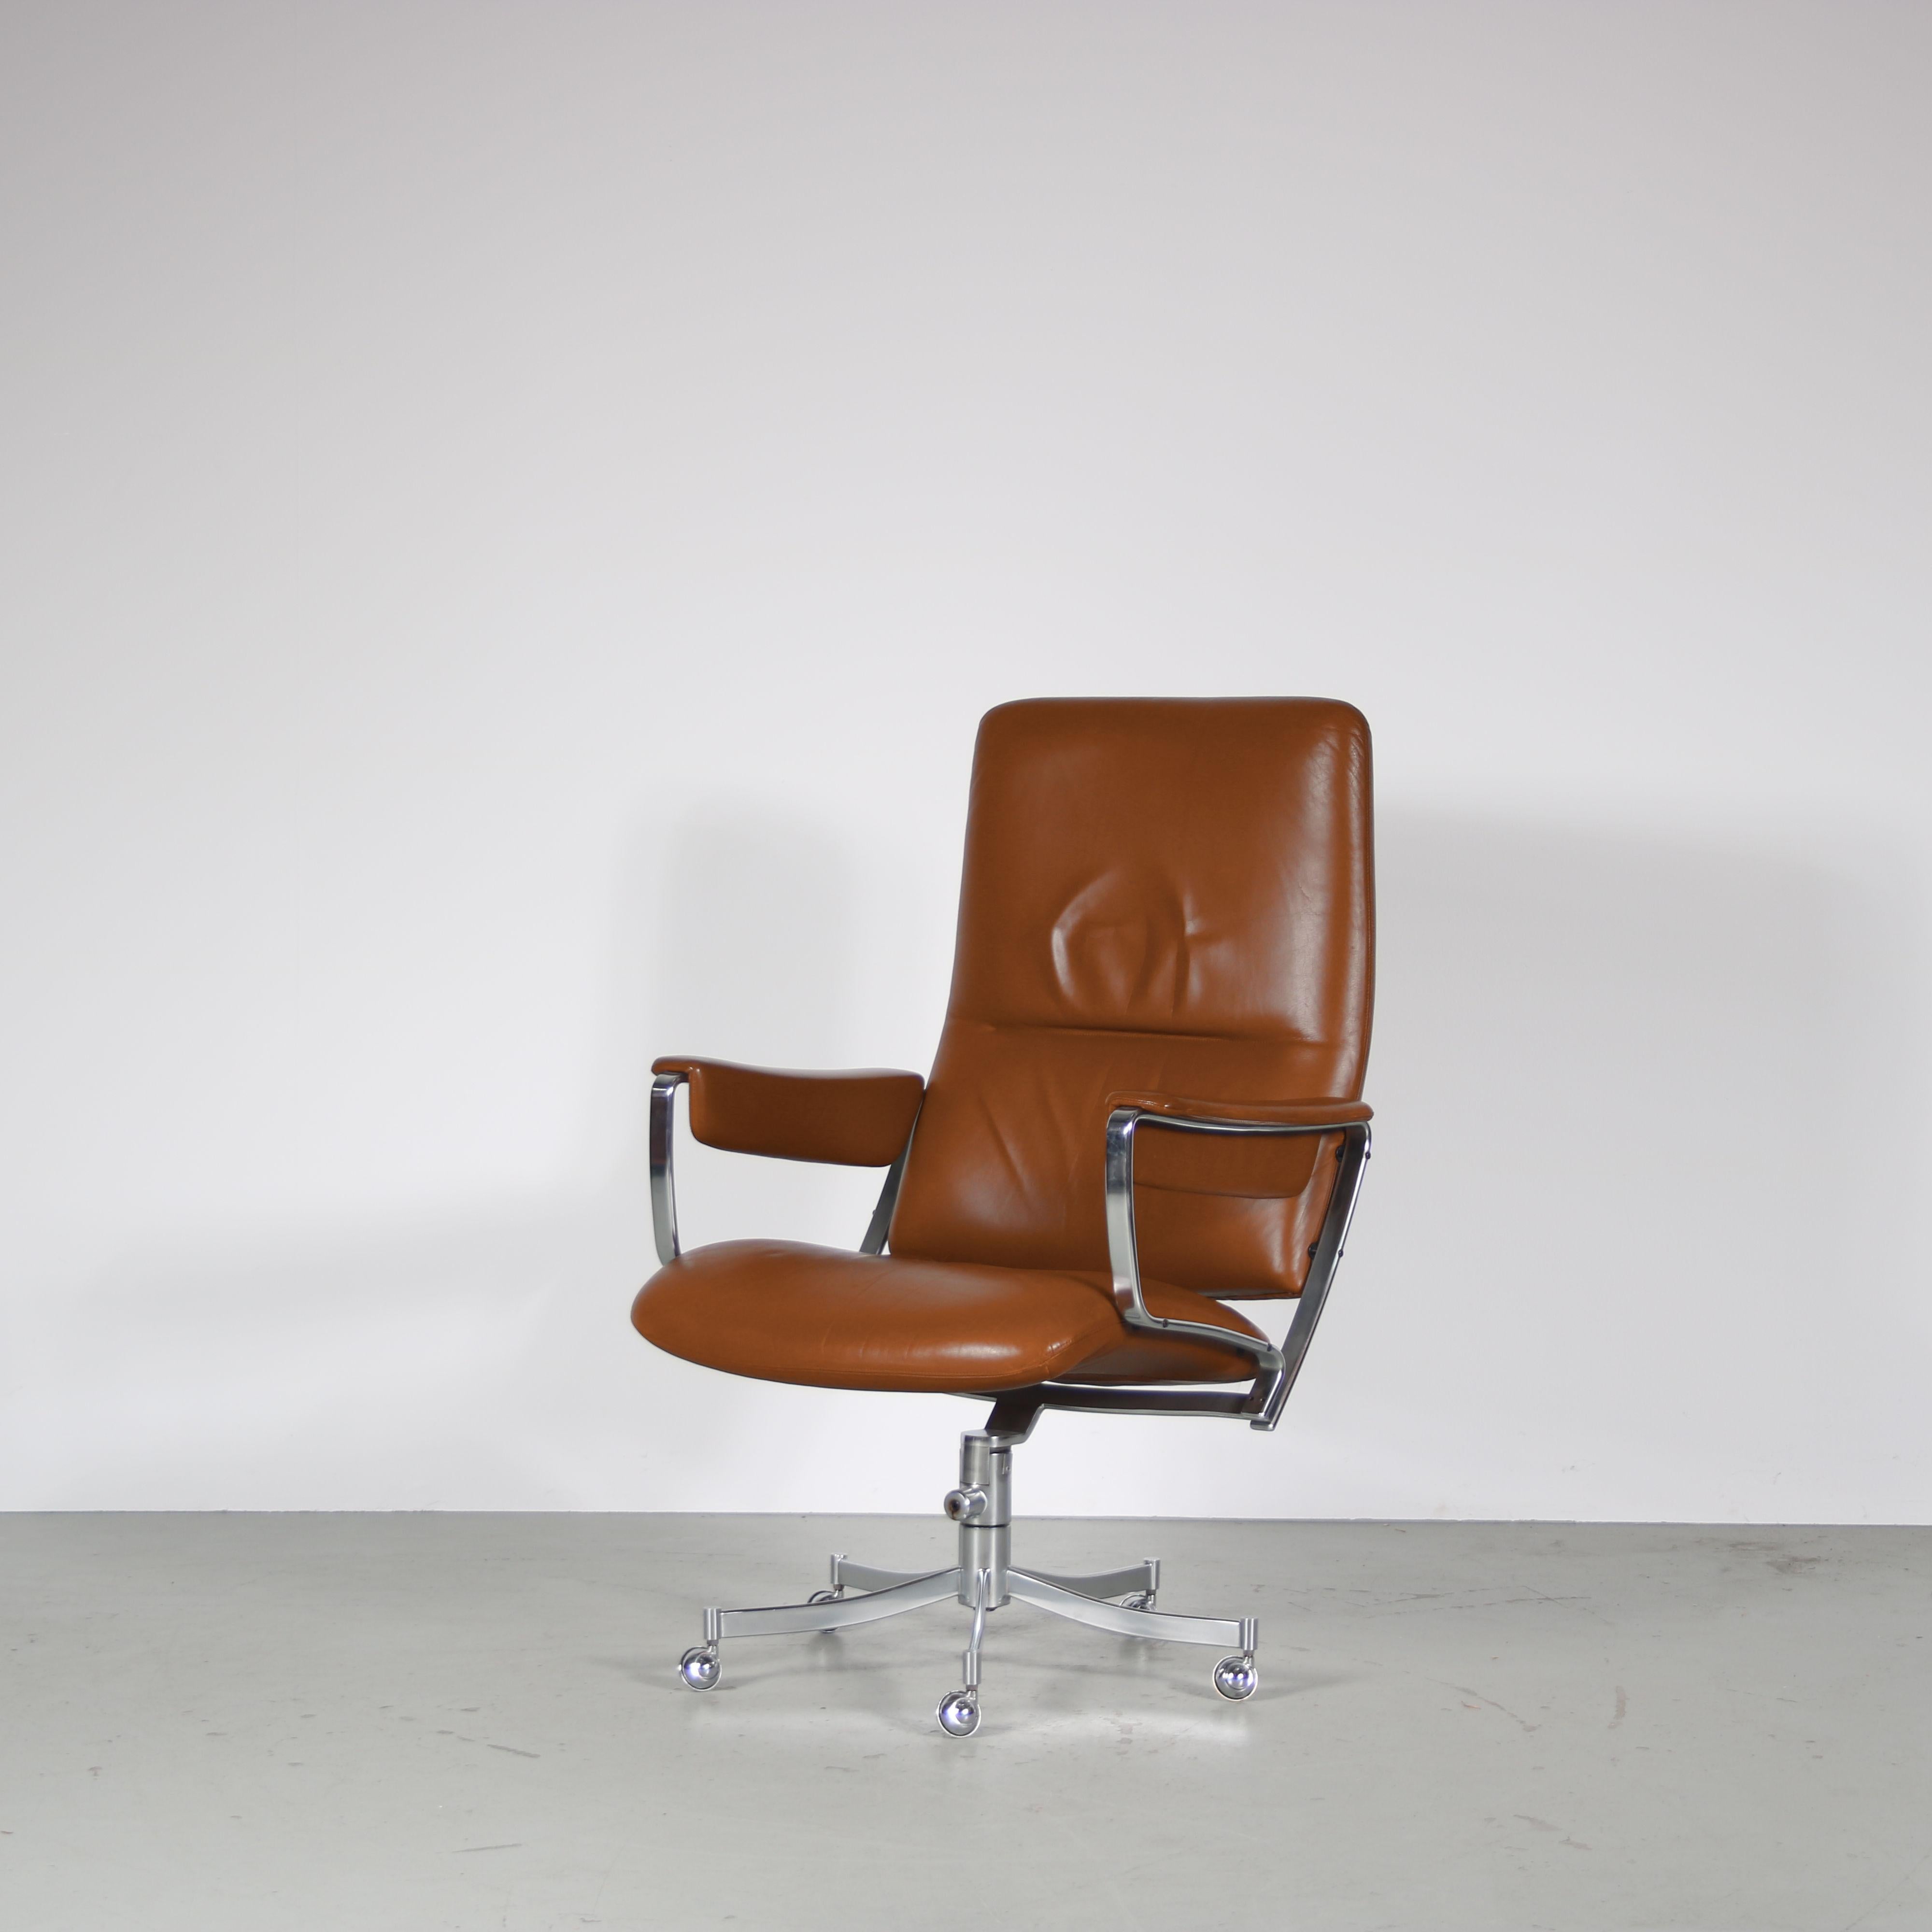 

A fantastic desk chair designed by Jorgen Kastholm and manufactured by Kill International in Germany during the 1970s.

This elegant and impressive chair, model “JK760”, has a chrome plated metal base that provides a wonderful yet elegant modern